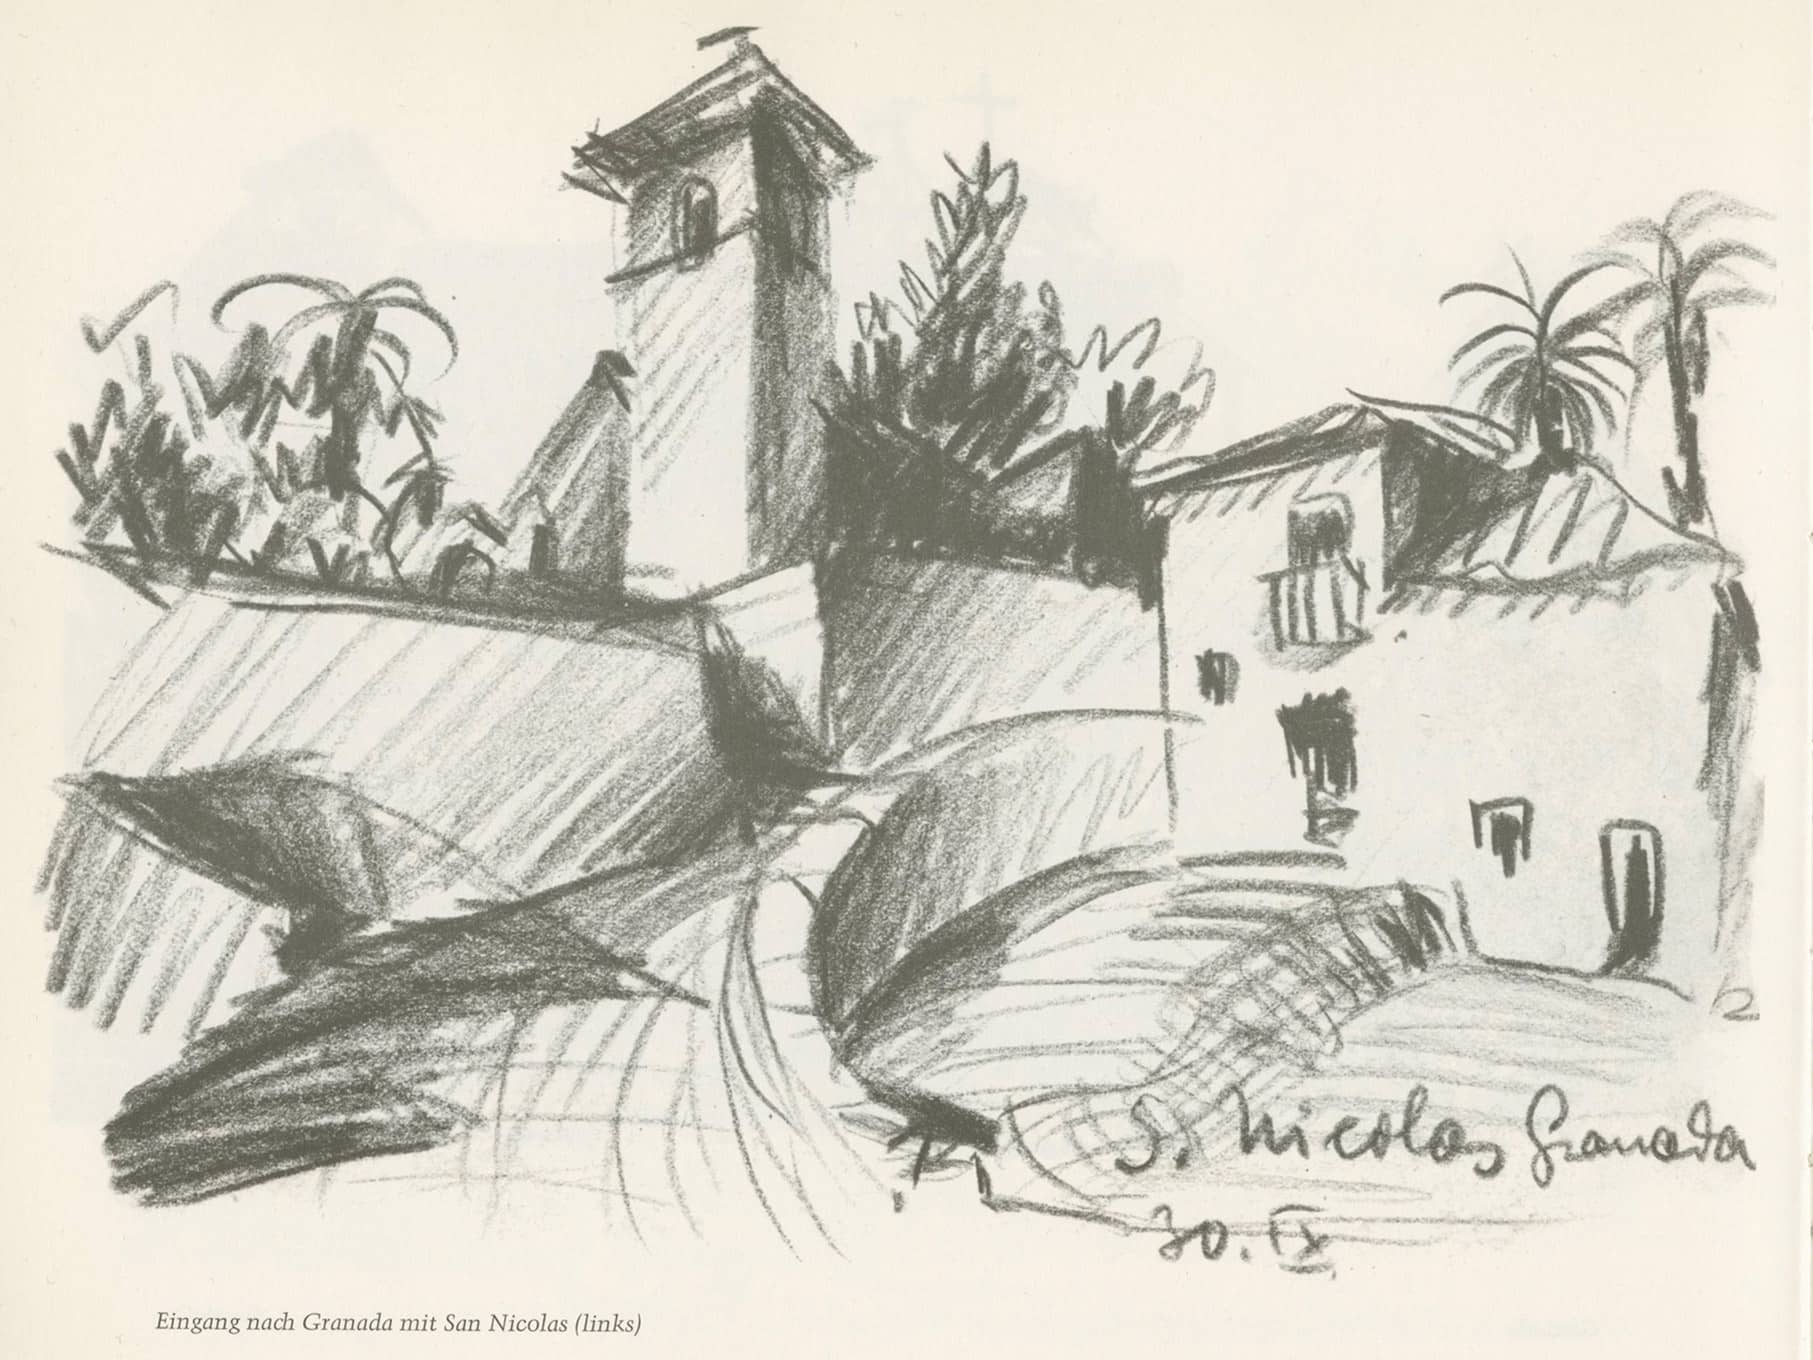 Sketch from the book “The Year in Spain 1920/21” by Ernst Neufert